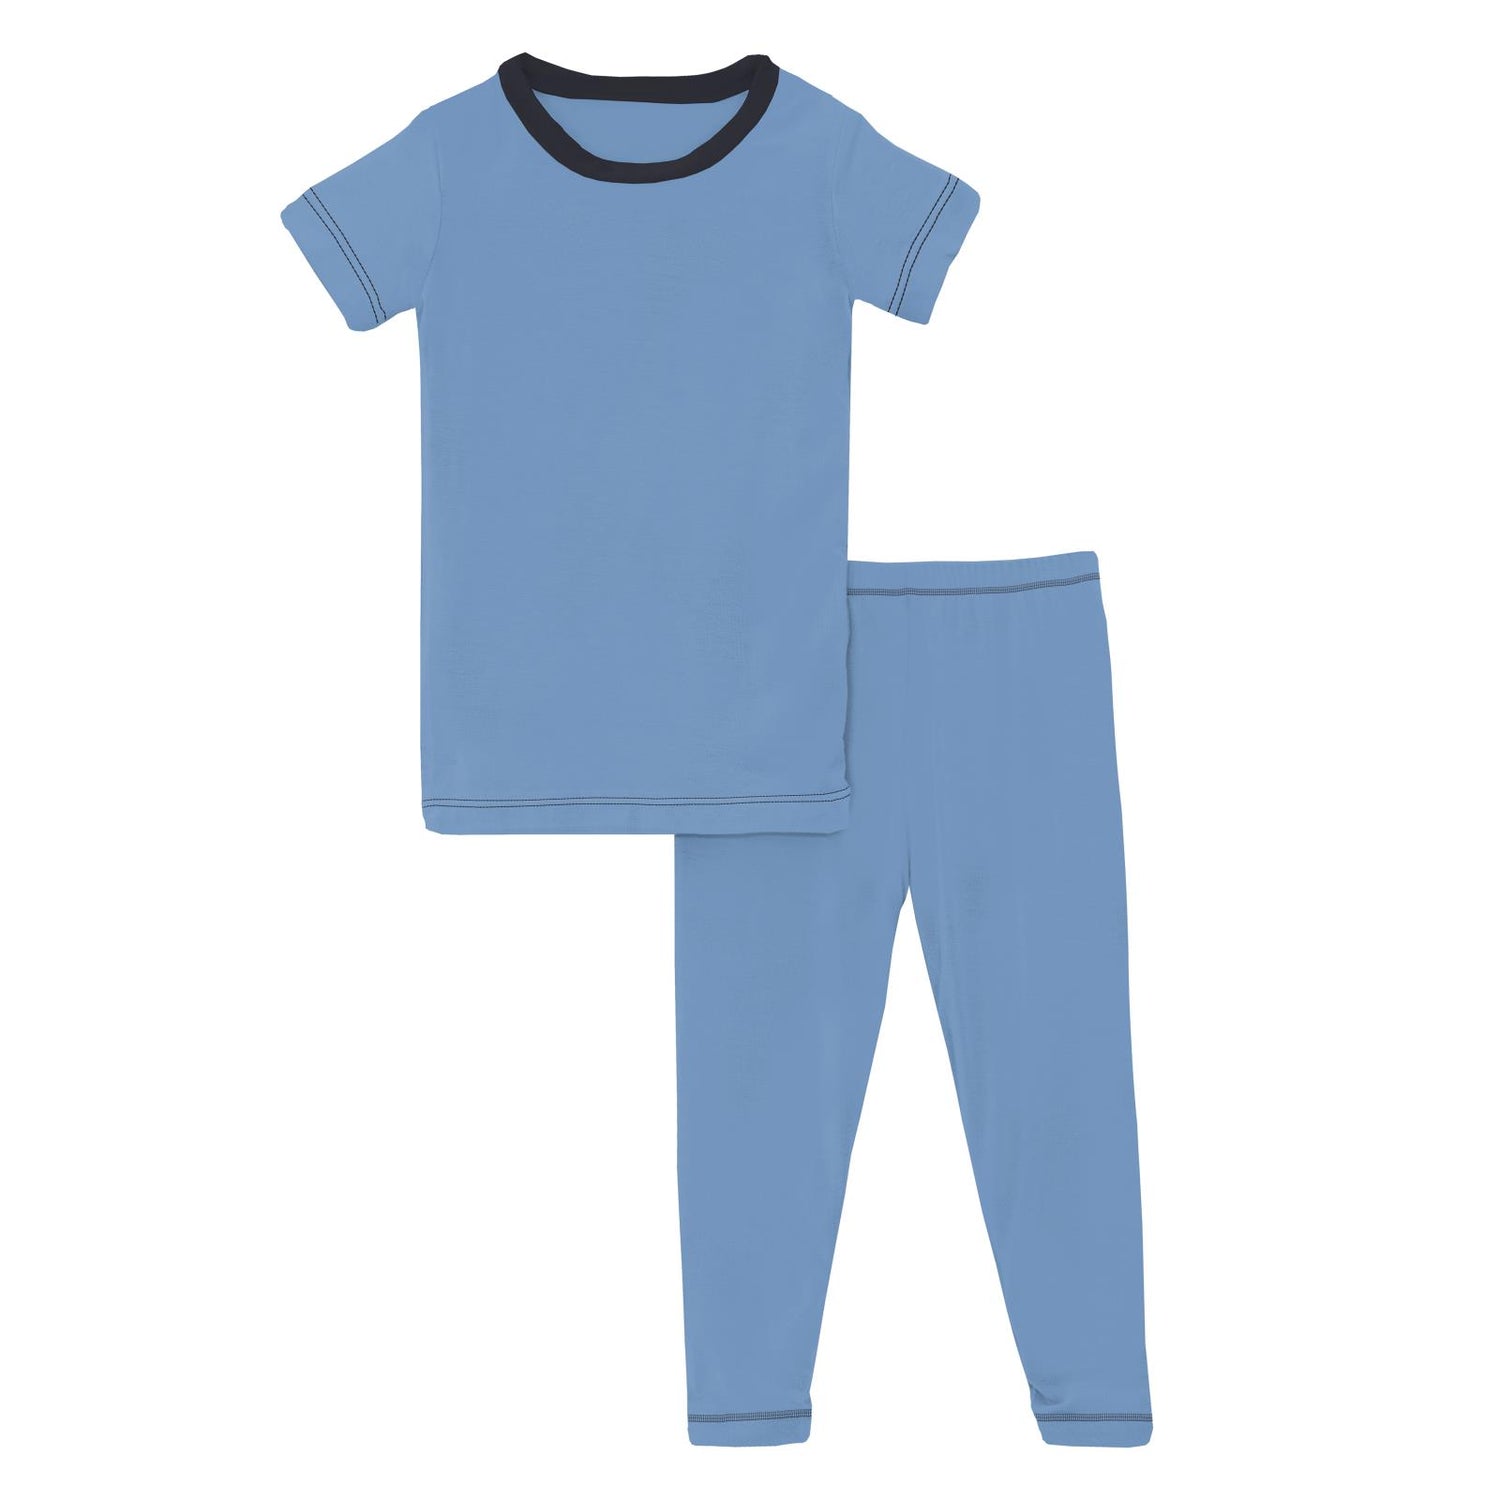 Short Sleeve Pajama Set in Dream Blue with Deep Space